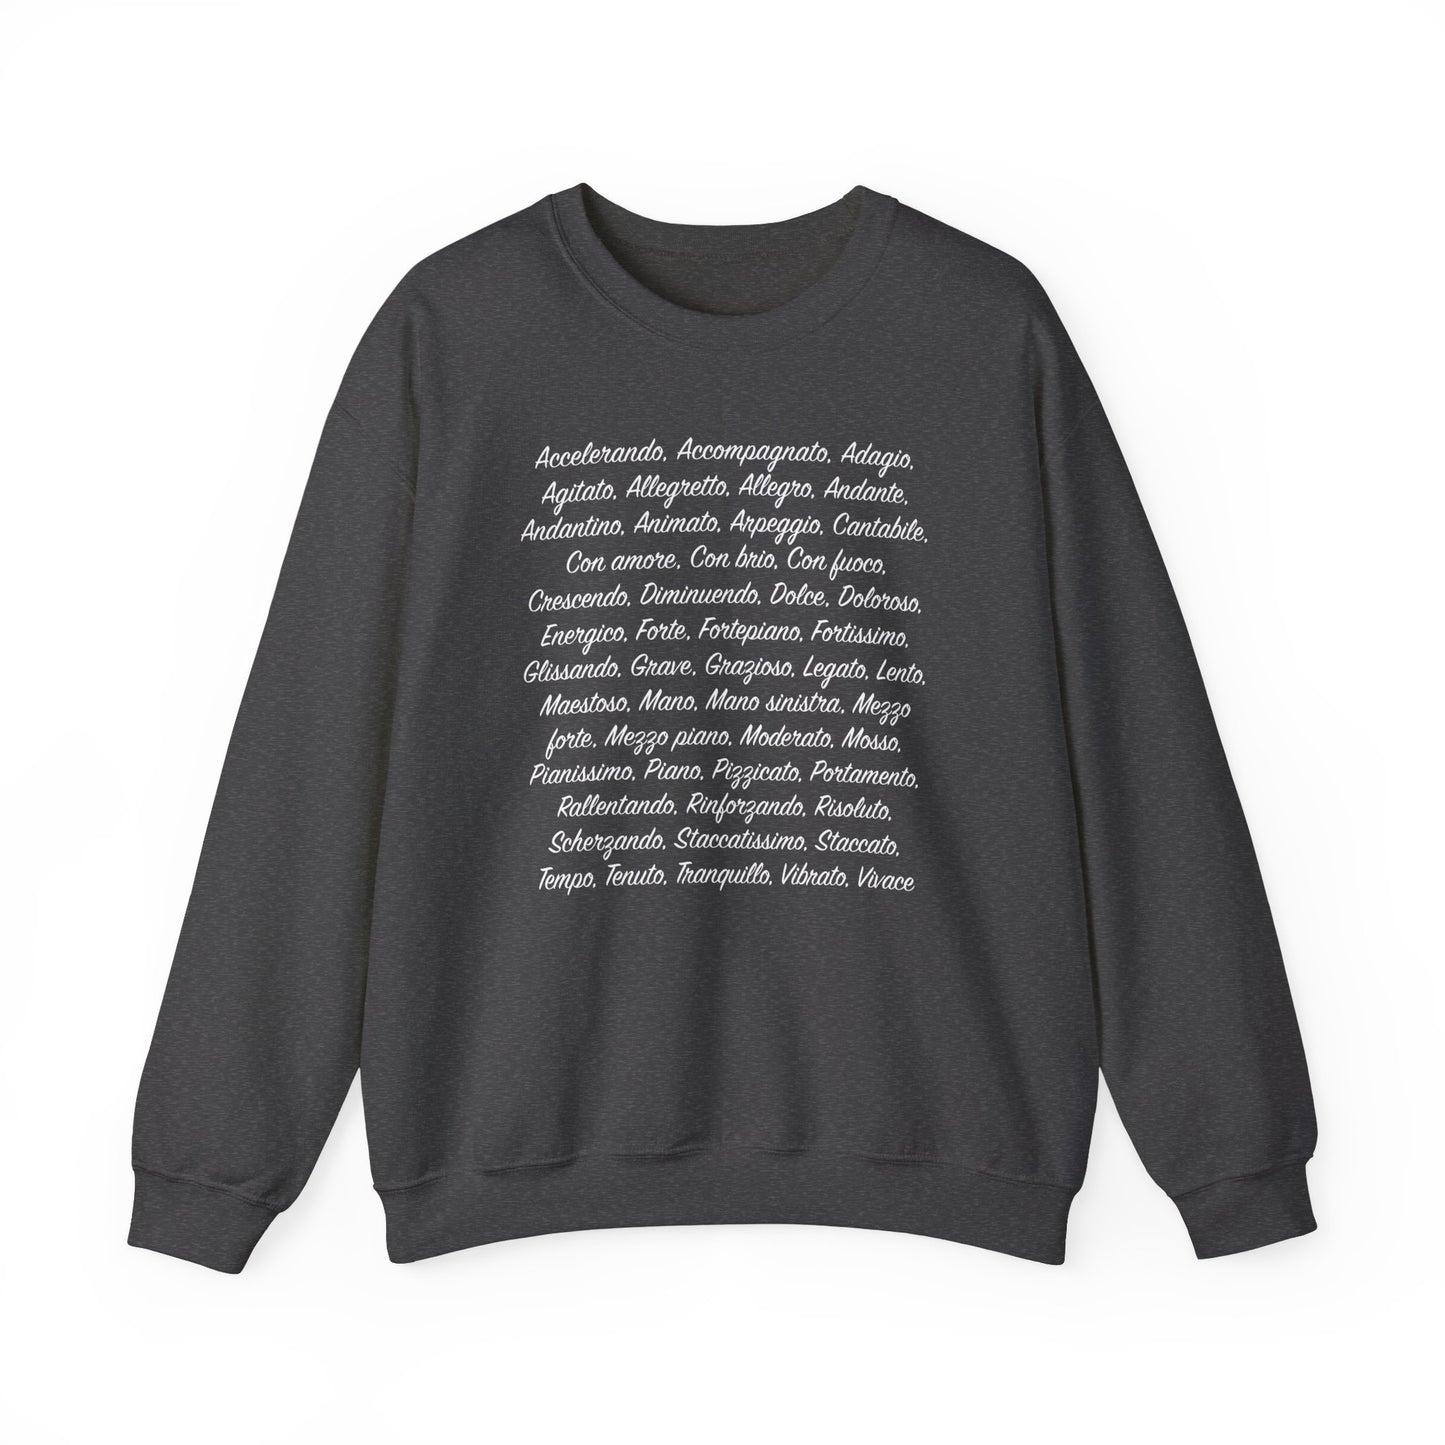 Musical Terms in Italian,  Unisex Heavy Blend Crewneck Sweatshirt, Classical Music Fan or Musician gift, dark colors, warm and comfortable, full list terminology